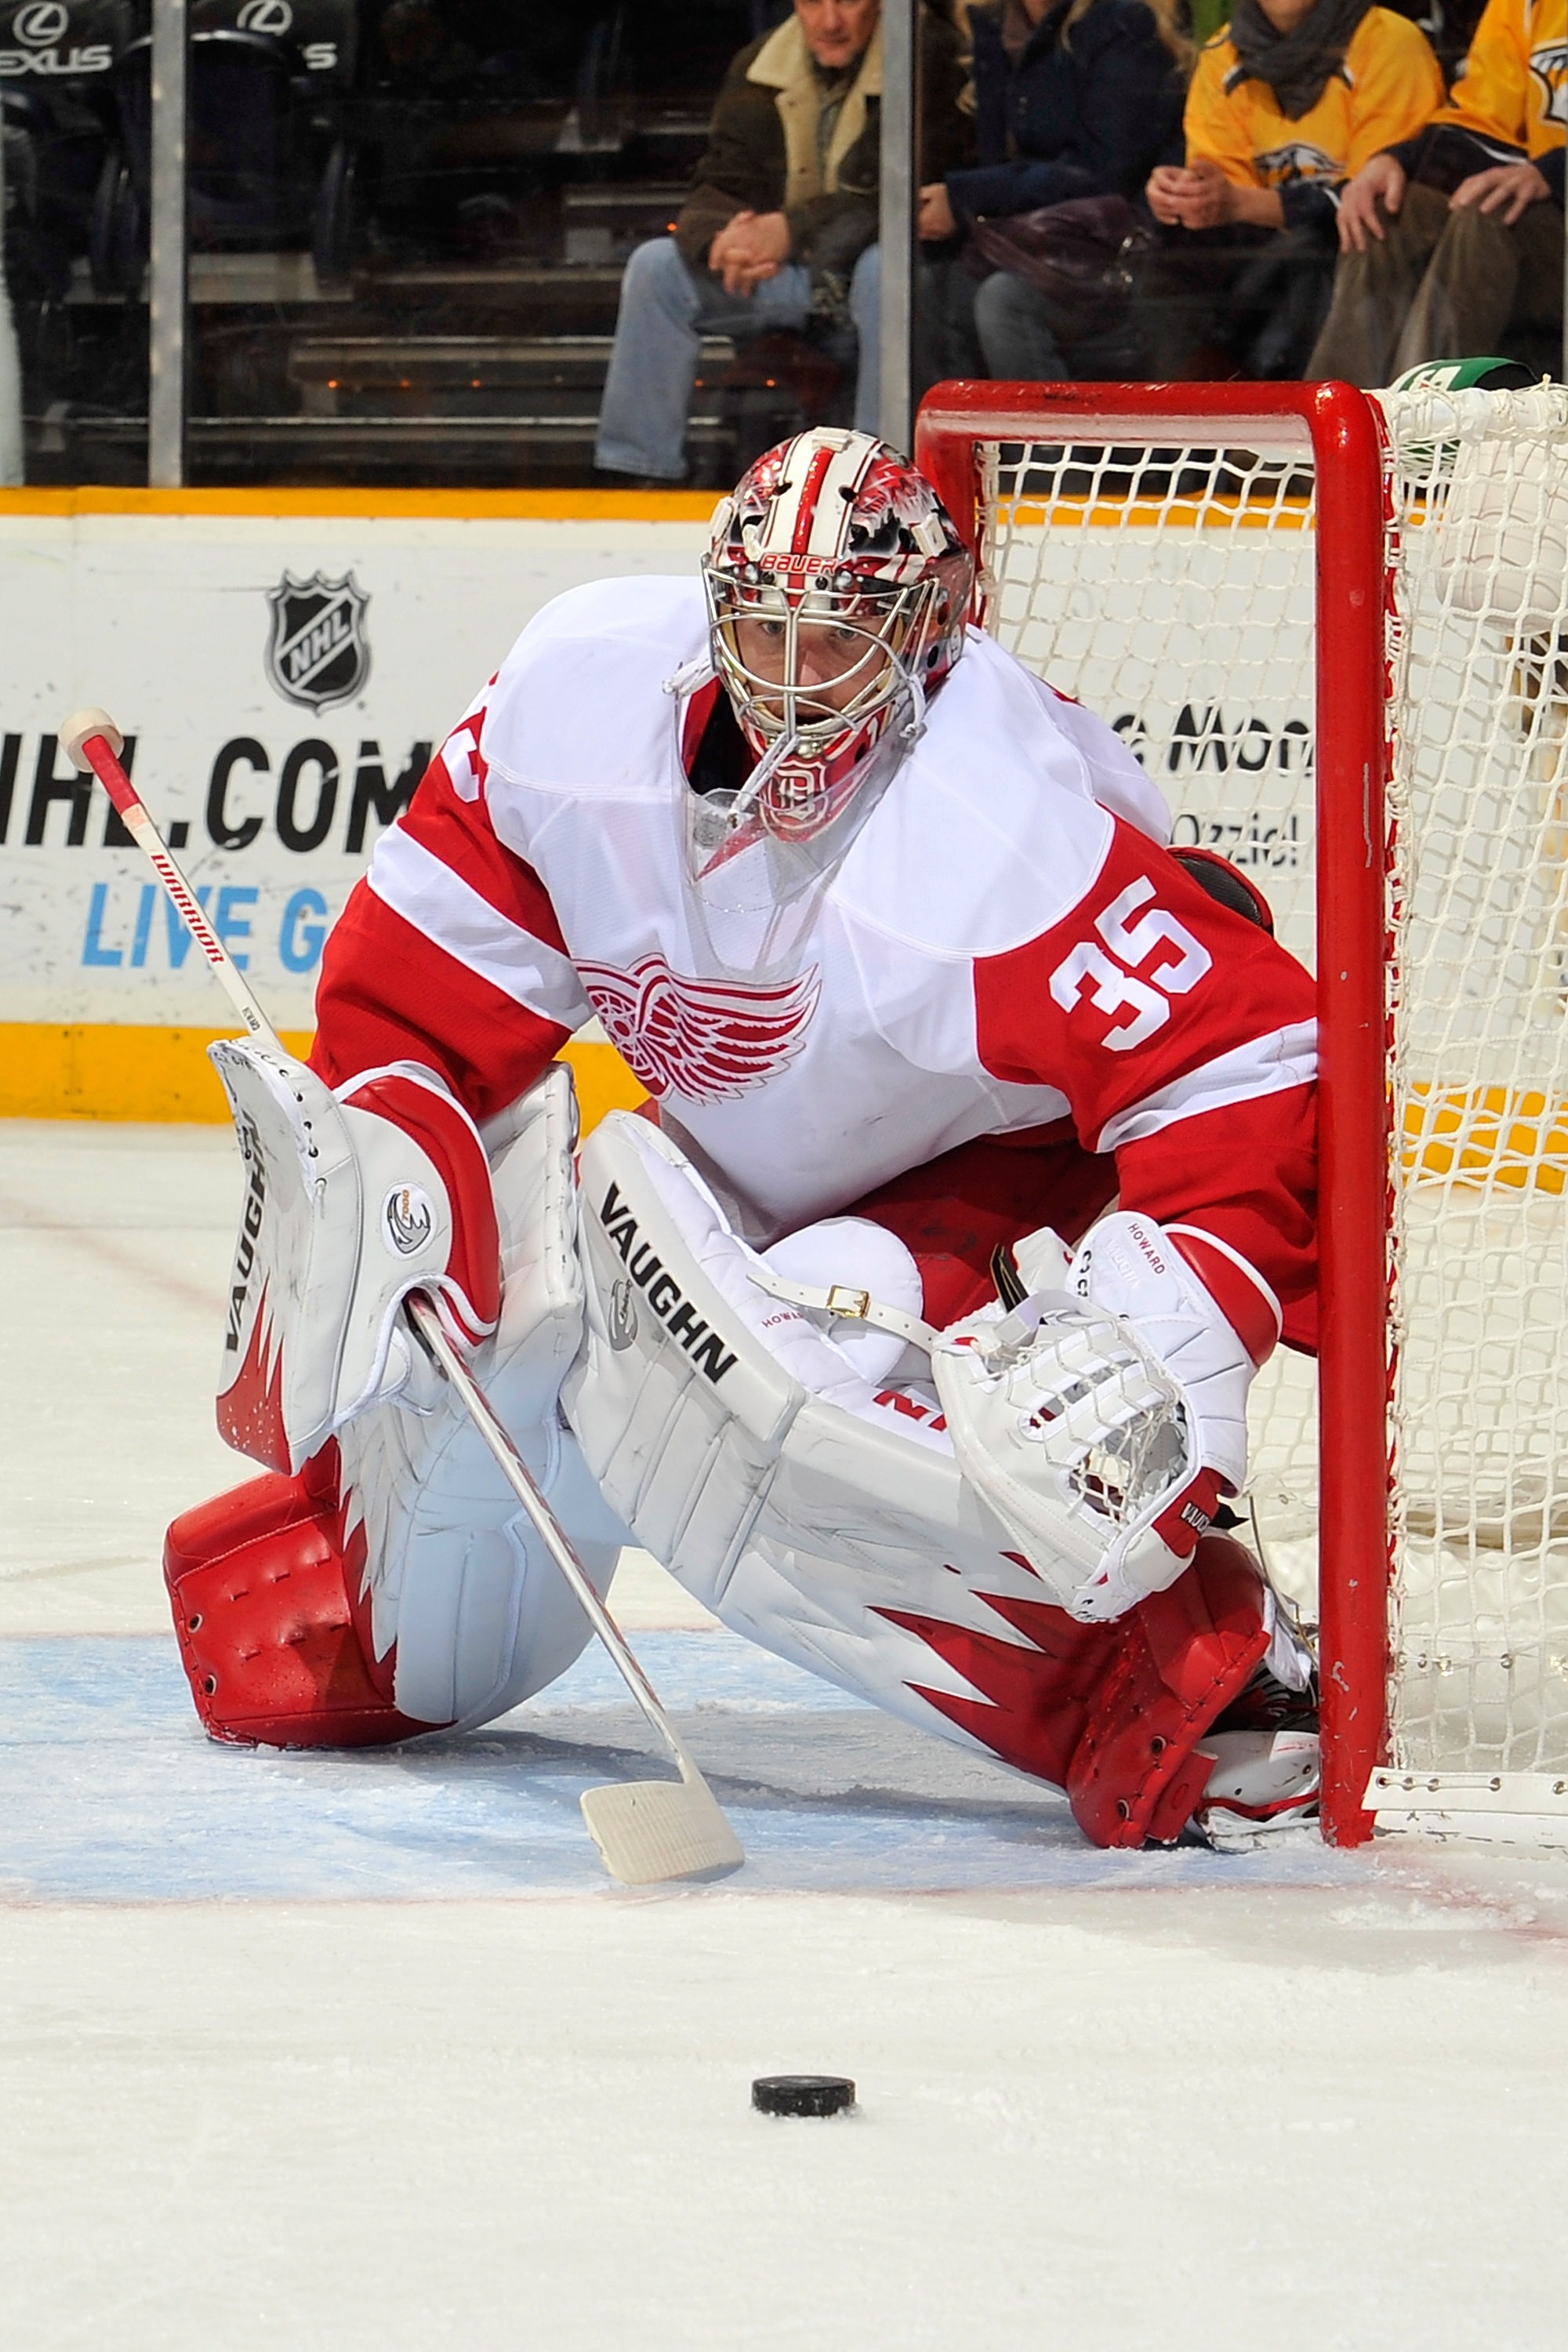 Need a vertically oriented wallpaper sized photo of Jimmy Howard